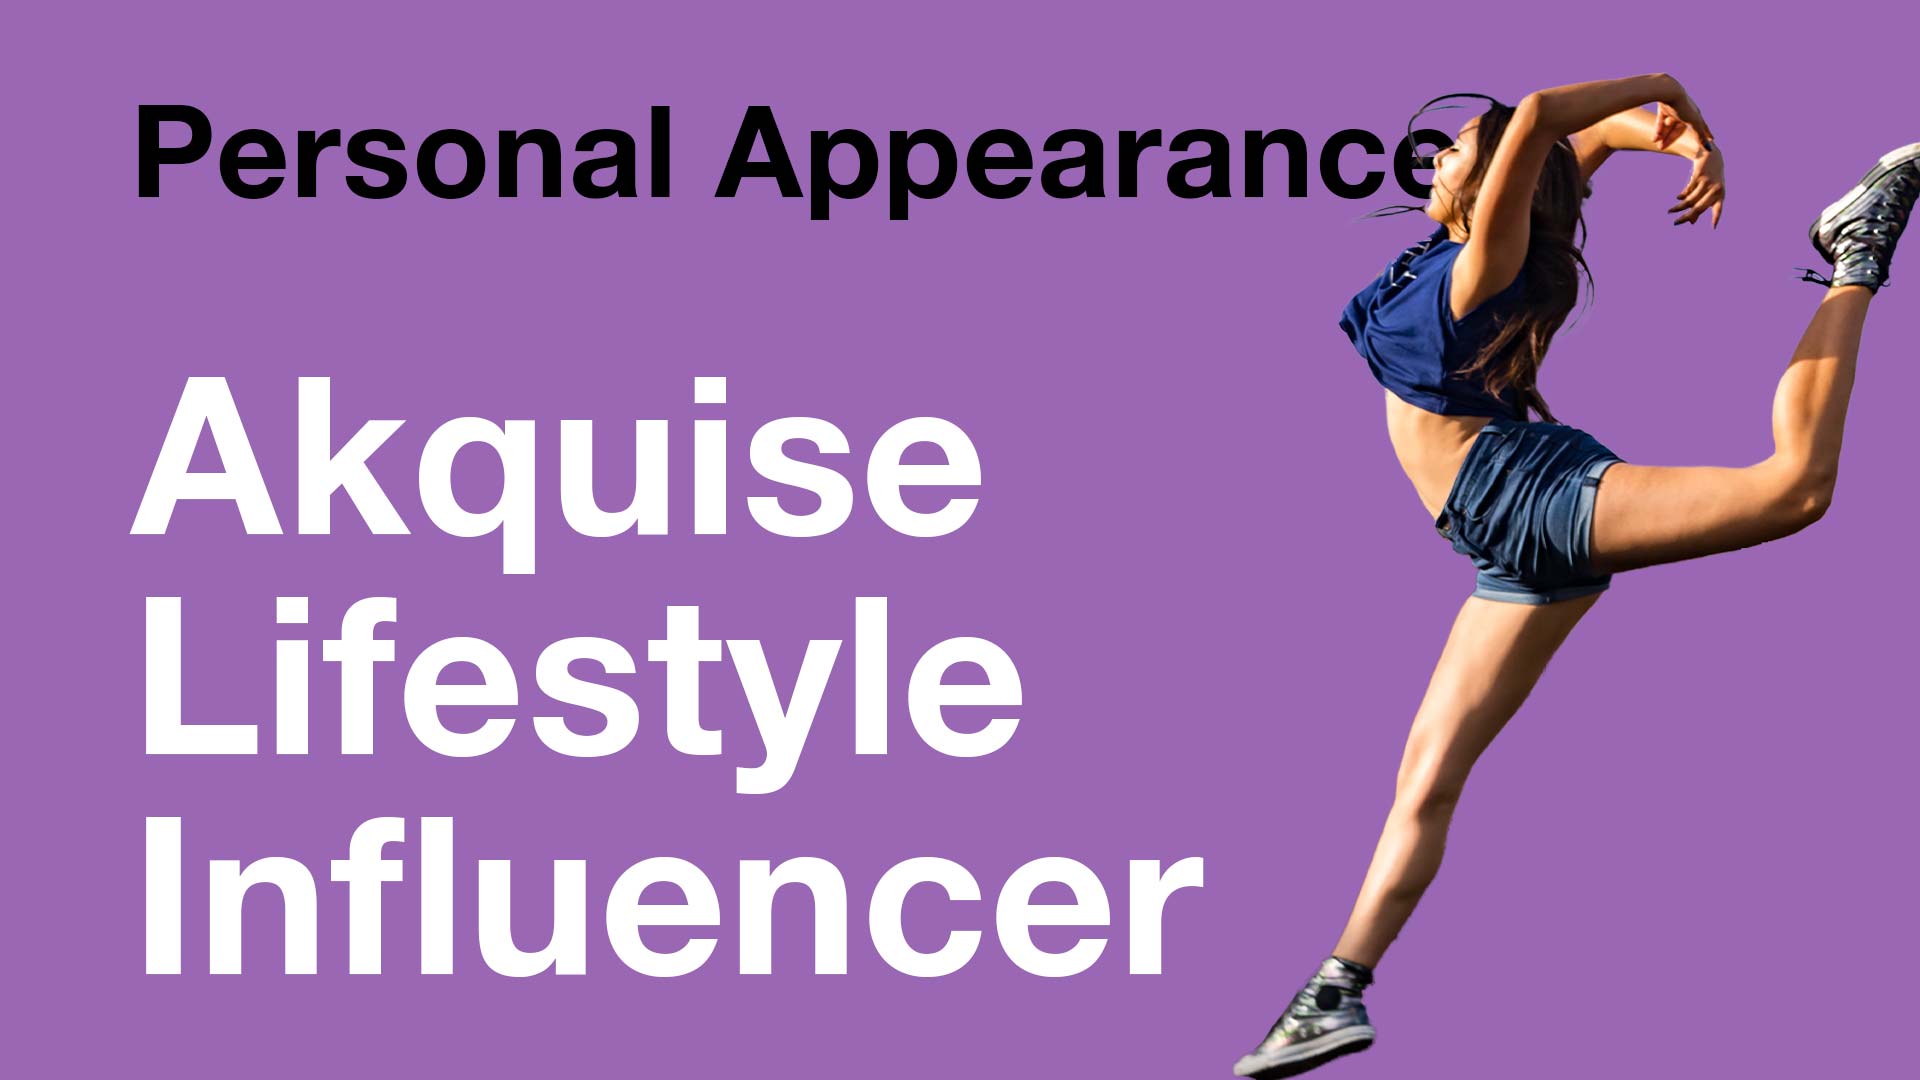 Akquise LIFESTYLE Influencer inkl. Personal Appearance